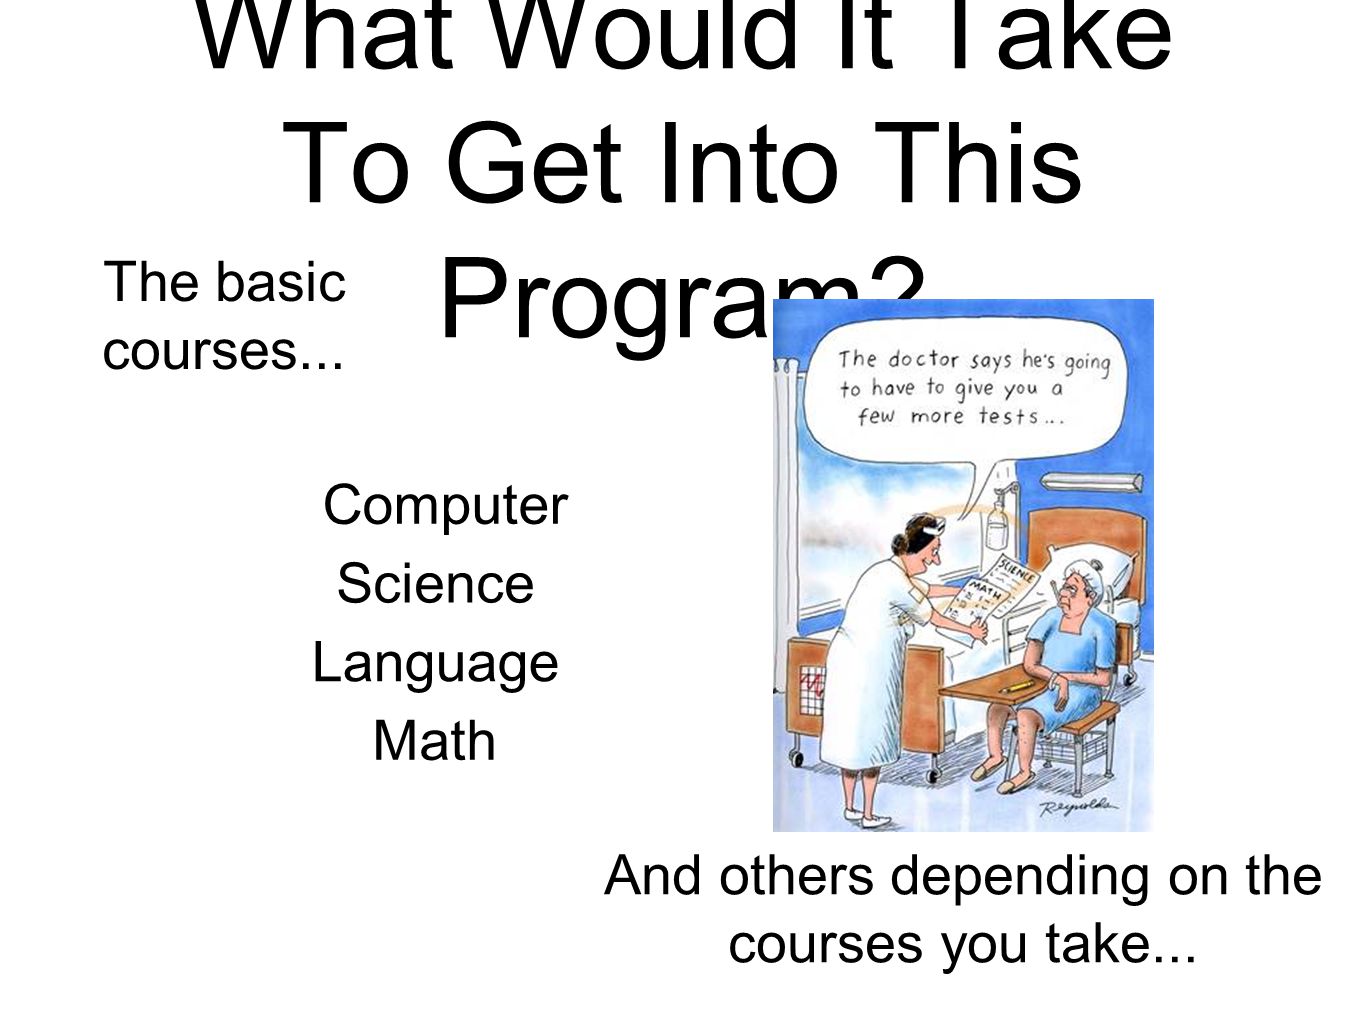 What Would It Take To Get Into This Program.